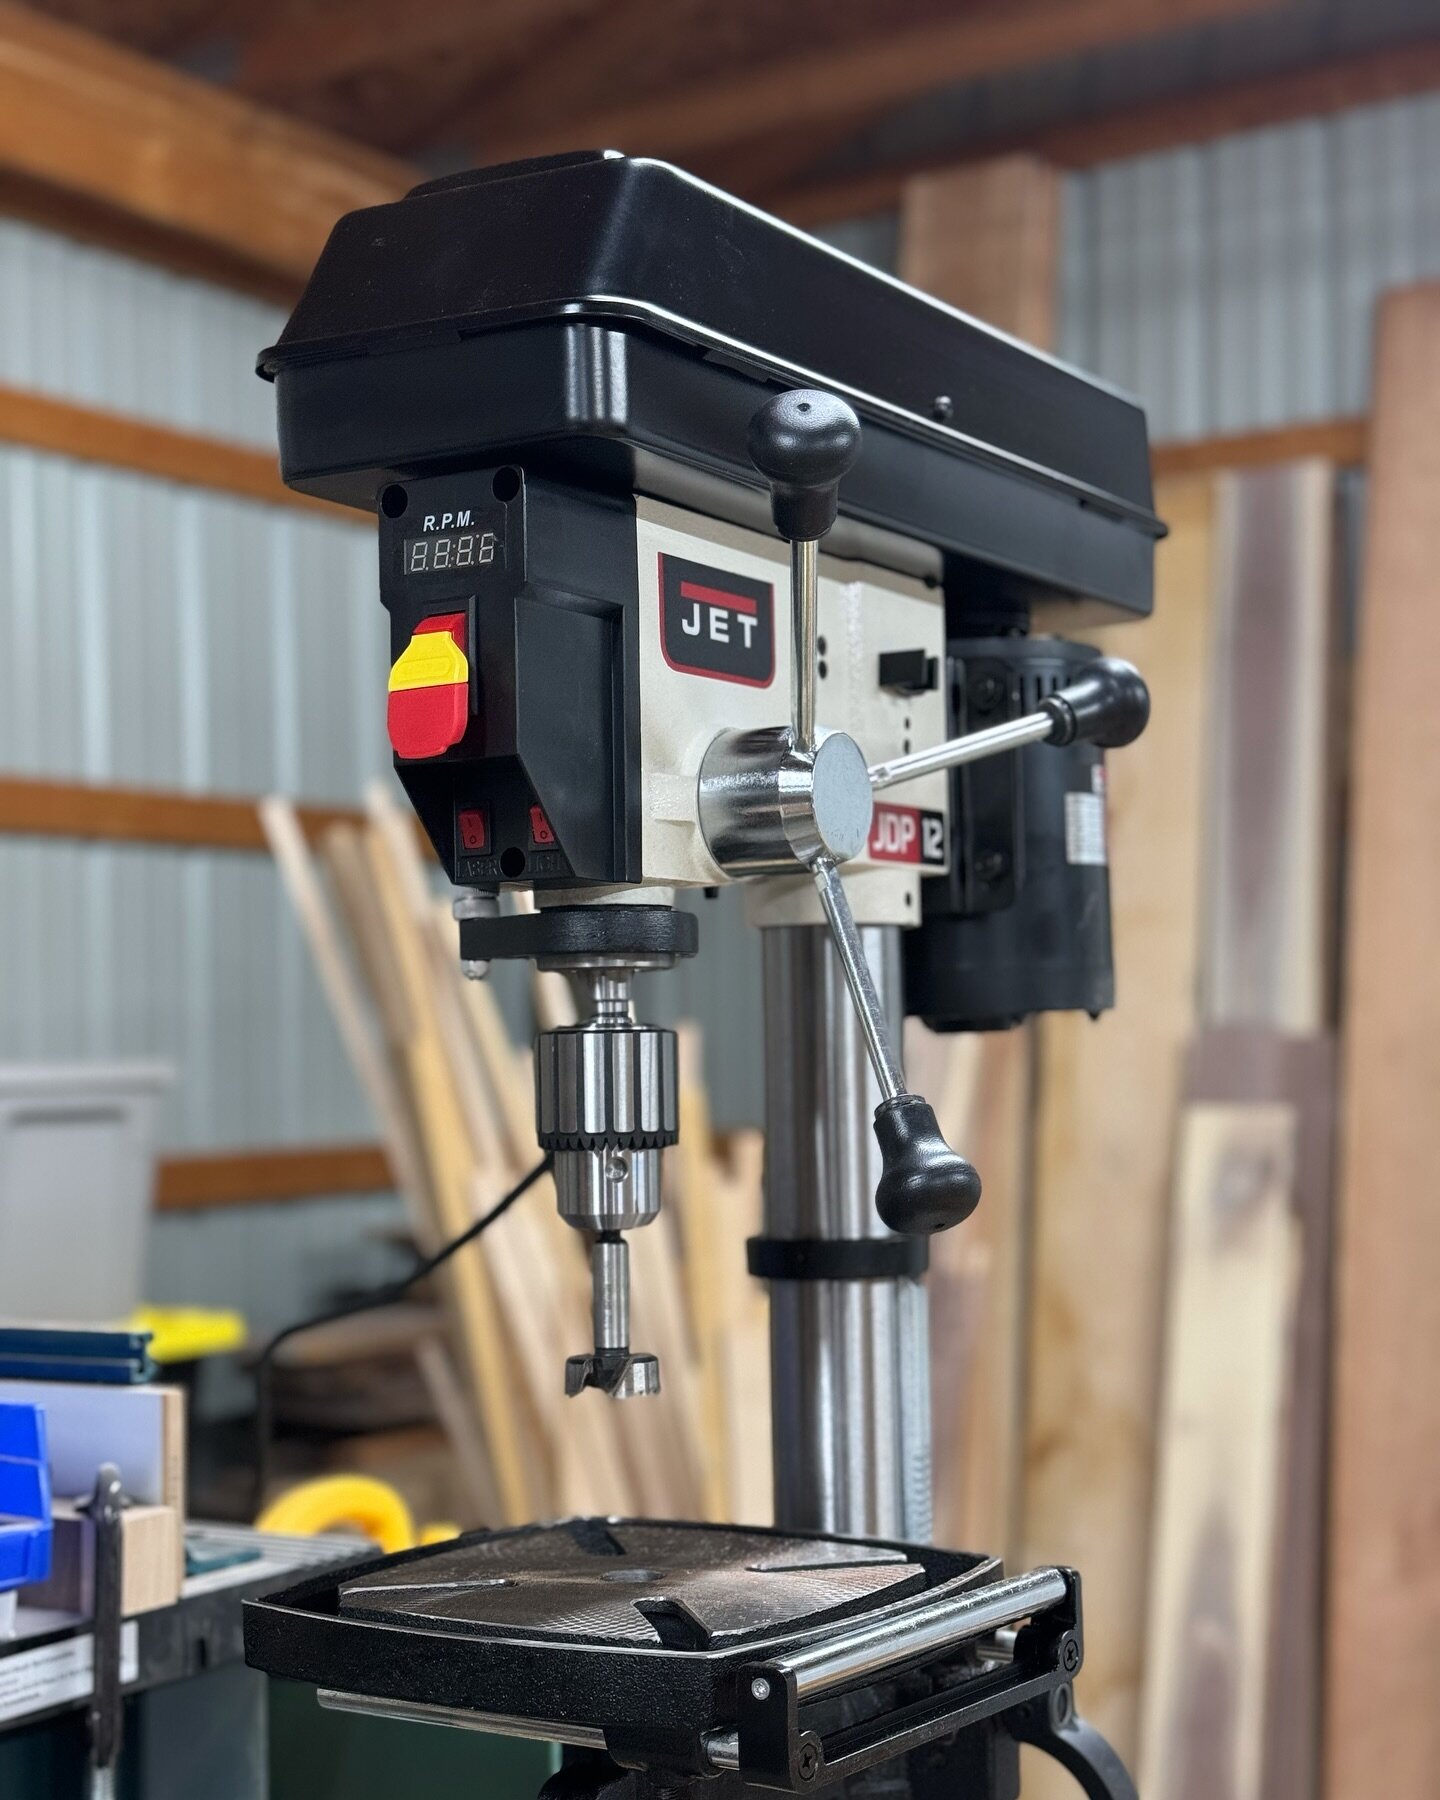 New Tool Tuesday! Say hello to our latest addition to our Life On Reed woodshop! This @jet.woodworking 12in benchtop drill press will transform our projects! Huge thanks to Jeff from @cletool for help and amazing deal! 🤙🏻

#lifeonreed #ohio #handma